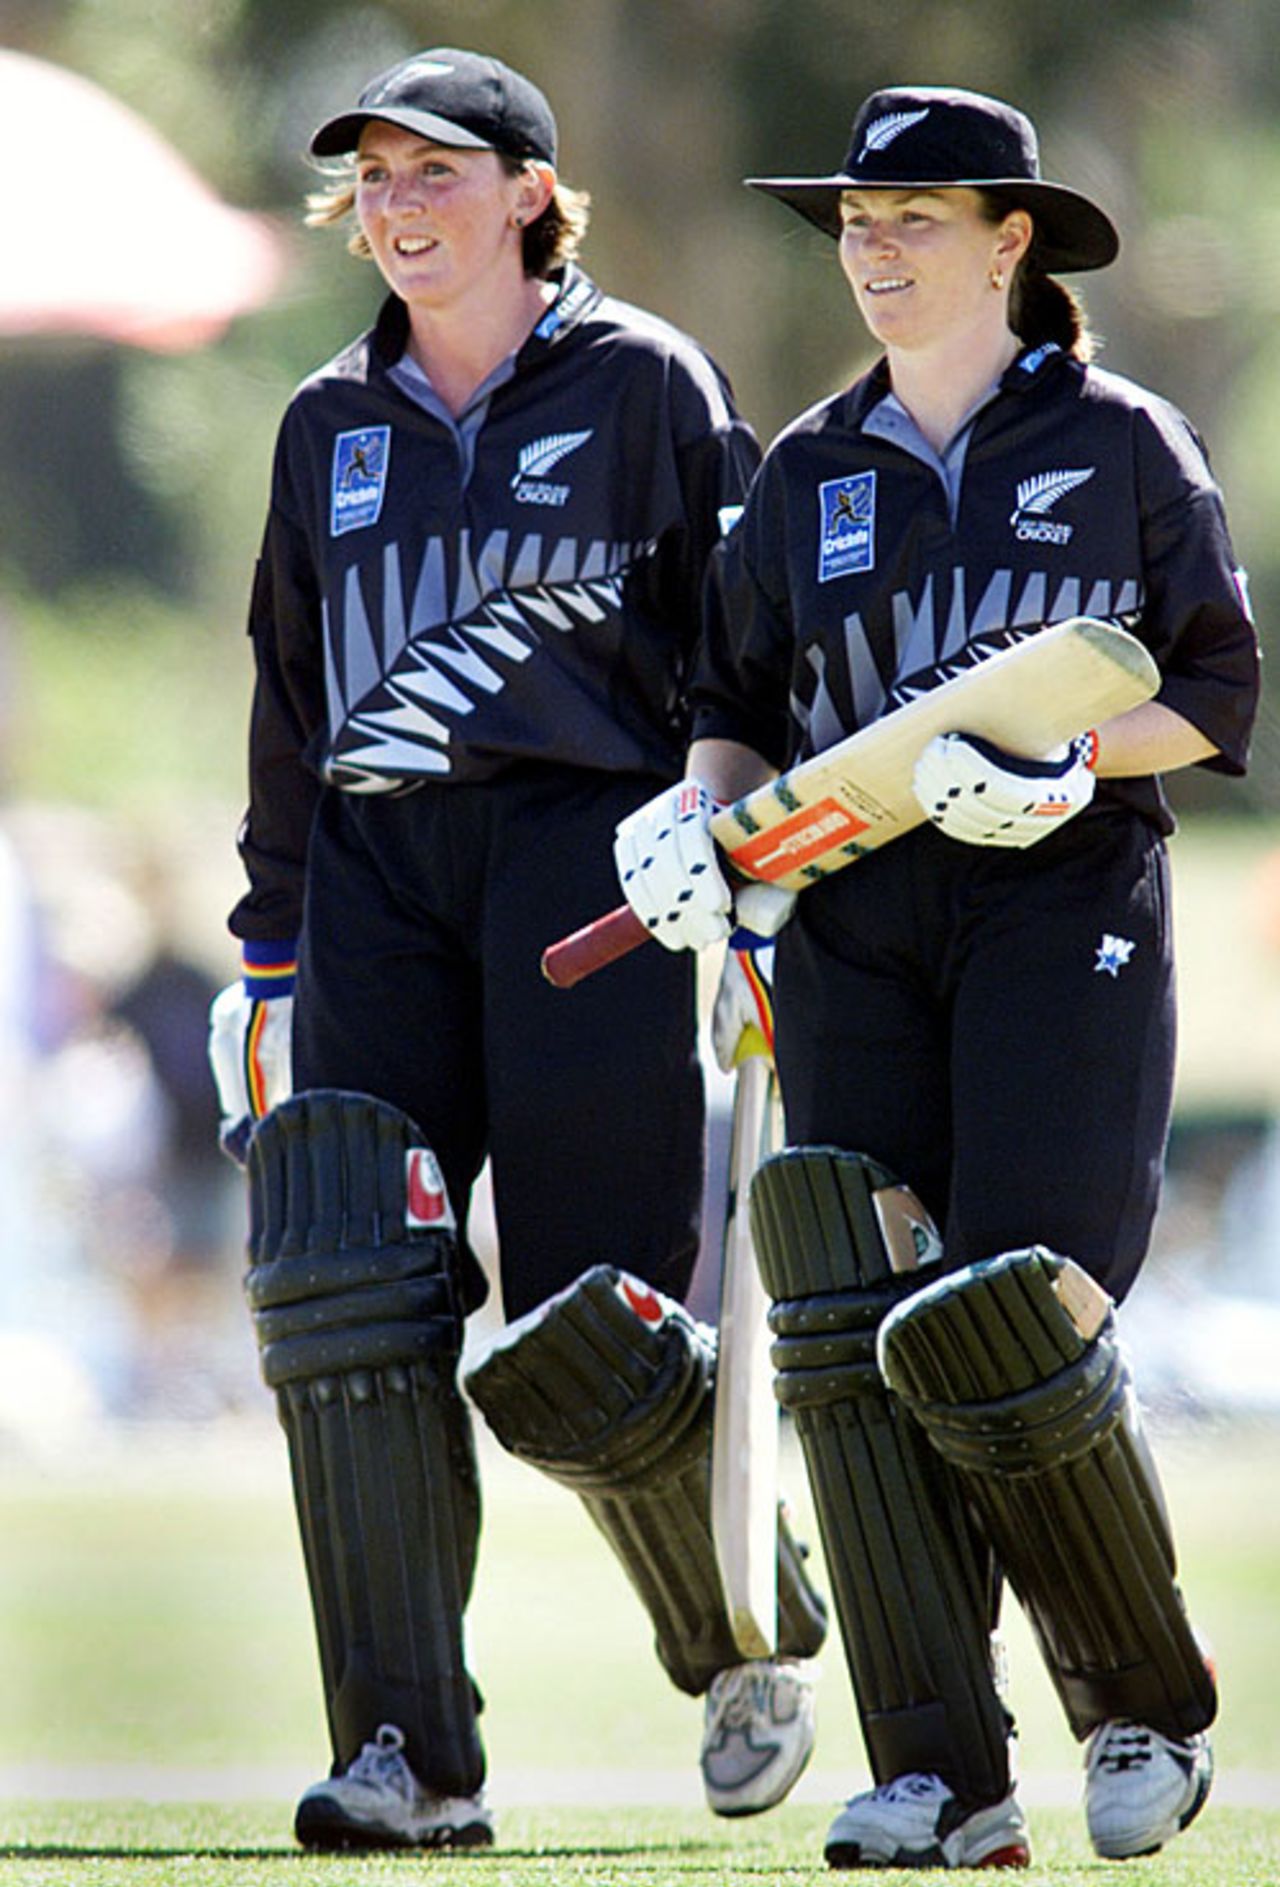 Anna O'Leary and Emily Drumm walk back after 86-run unbeaten stand, New Zealand v India, Women's World Cup semi-final, Lincoln, December 20, 2000